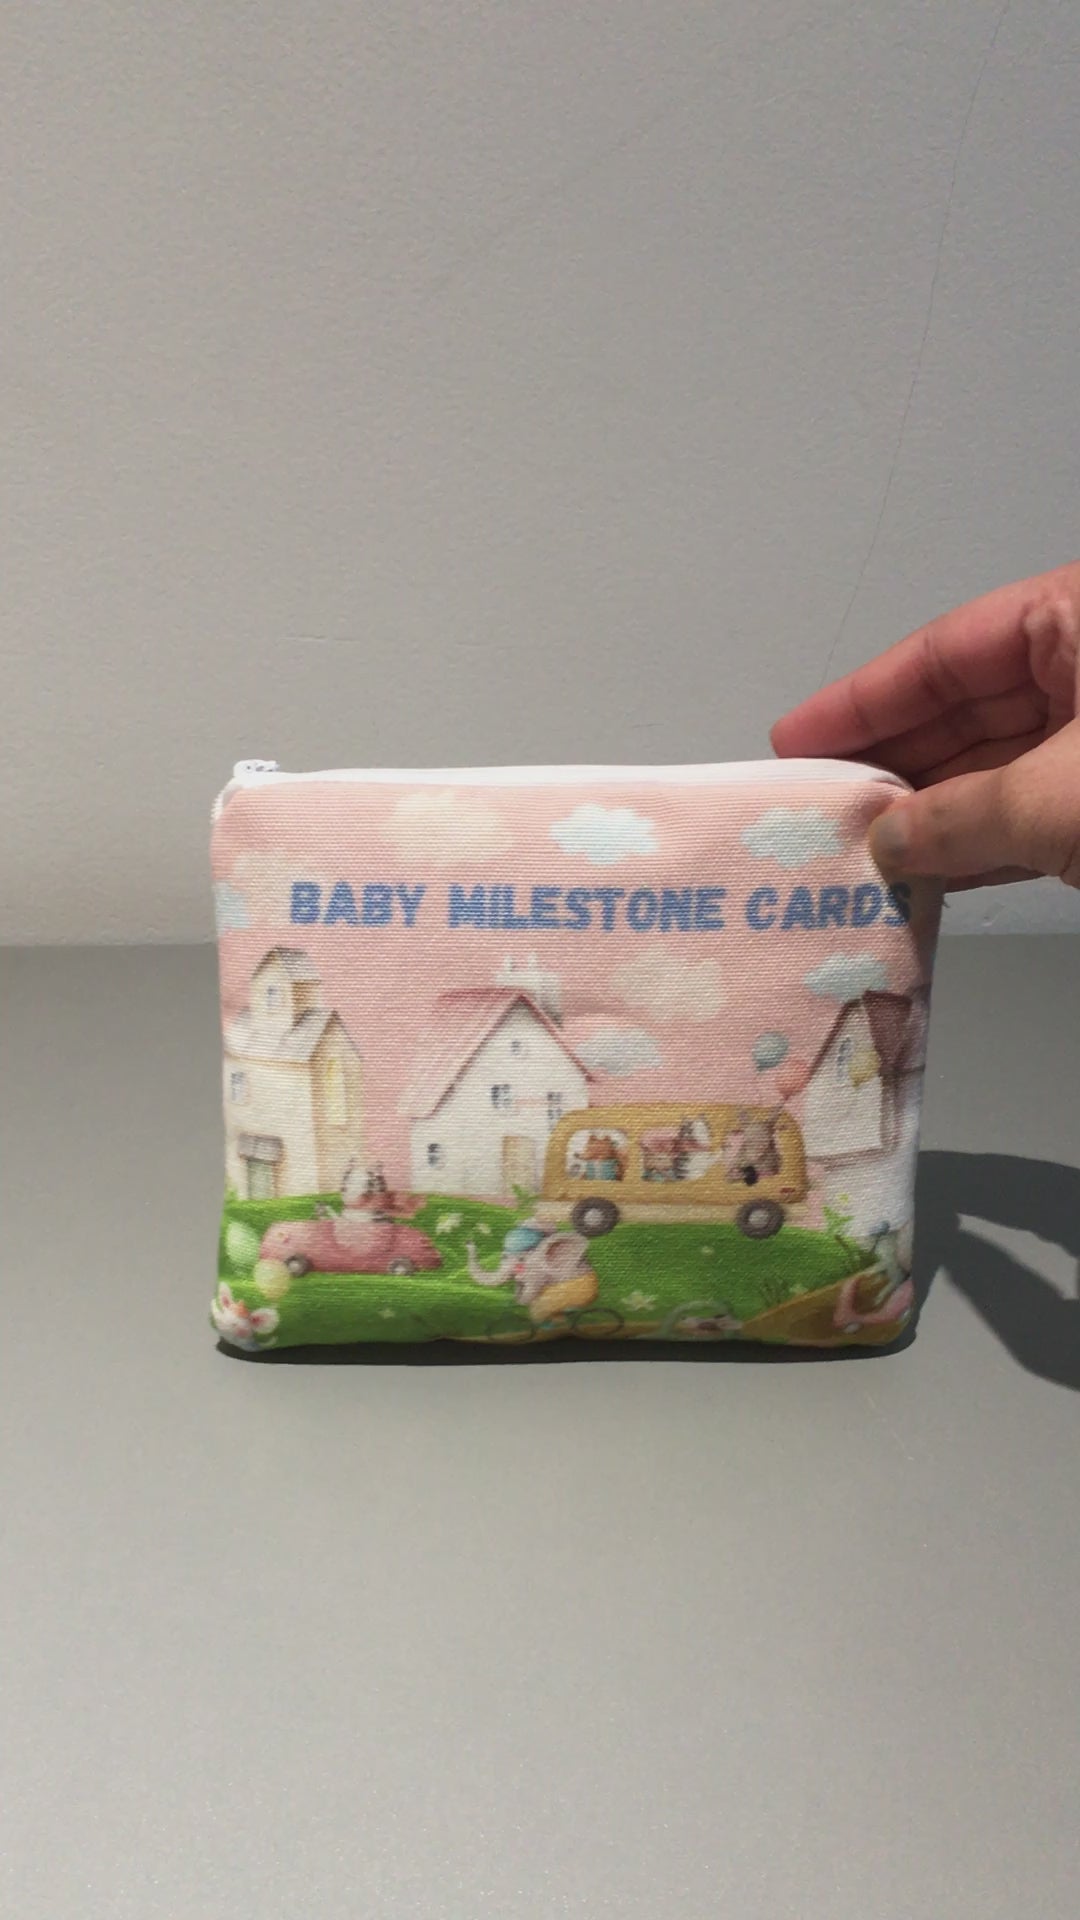 Milestone Cards for Baby